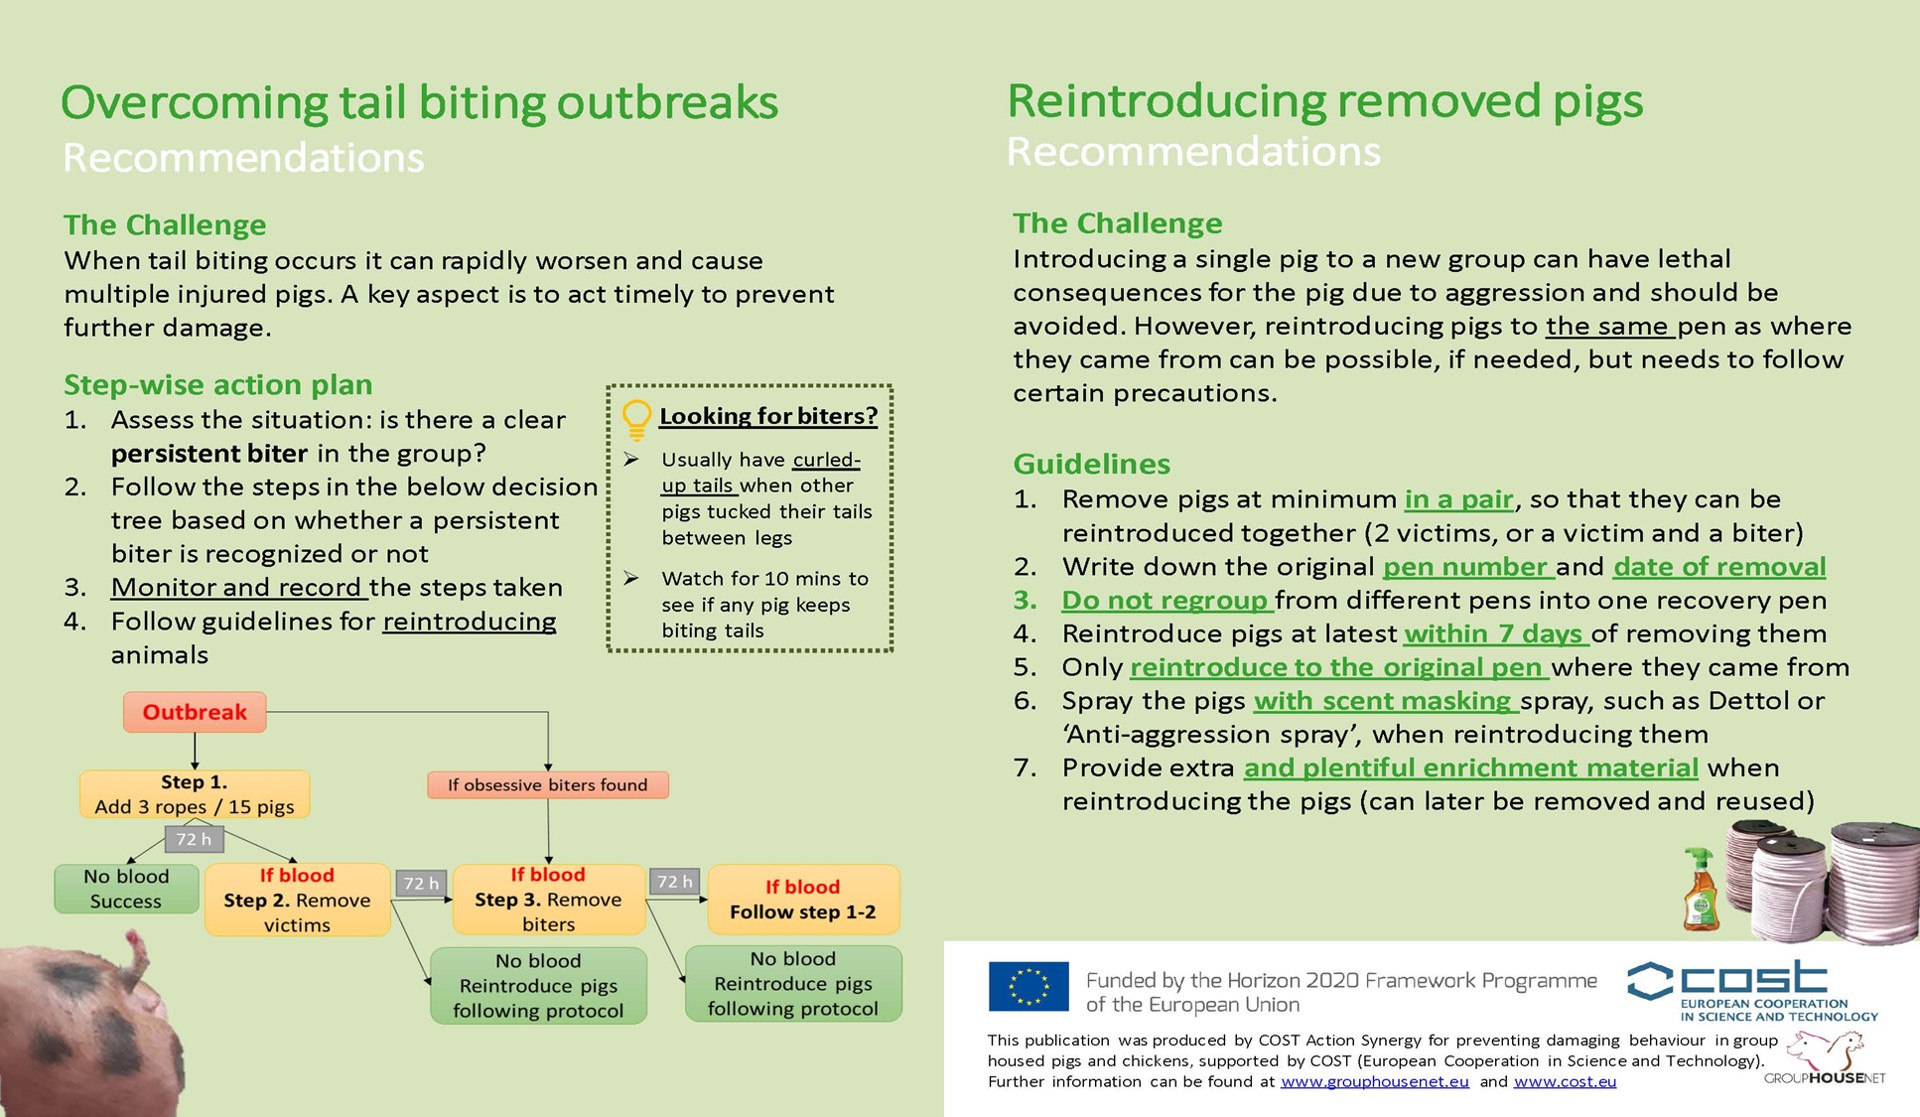 Leaflet on how to overcome tail biting outbreaks